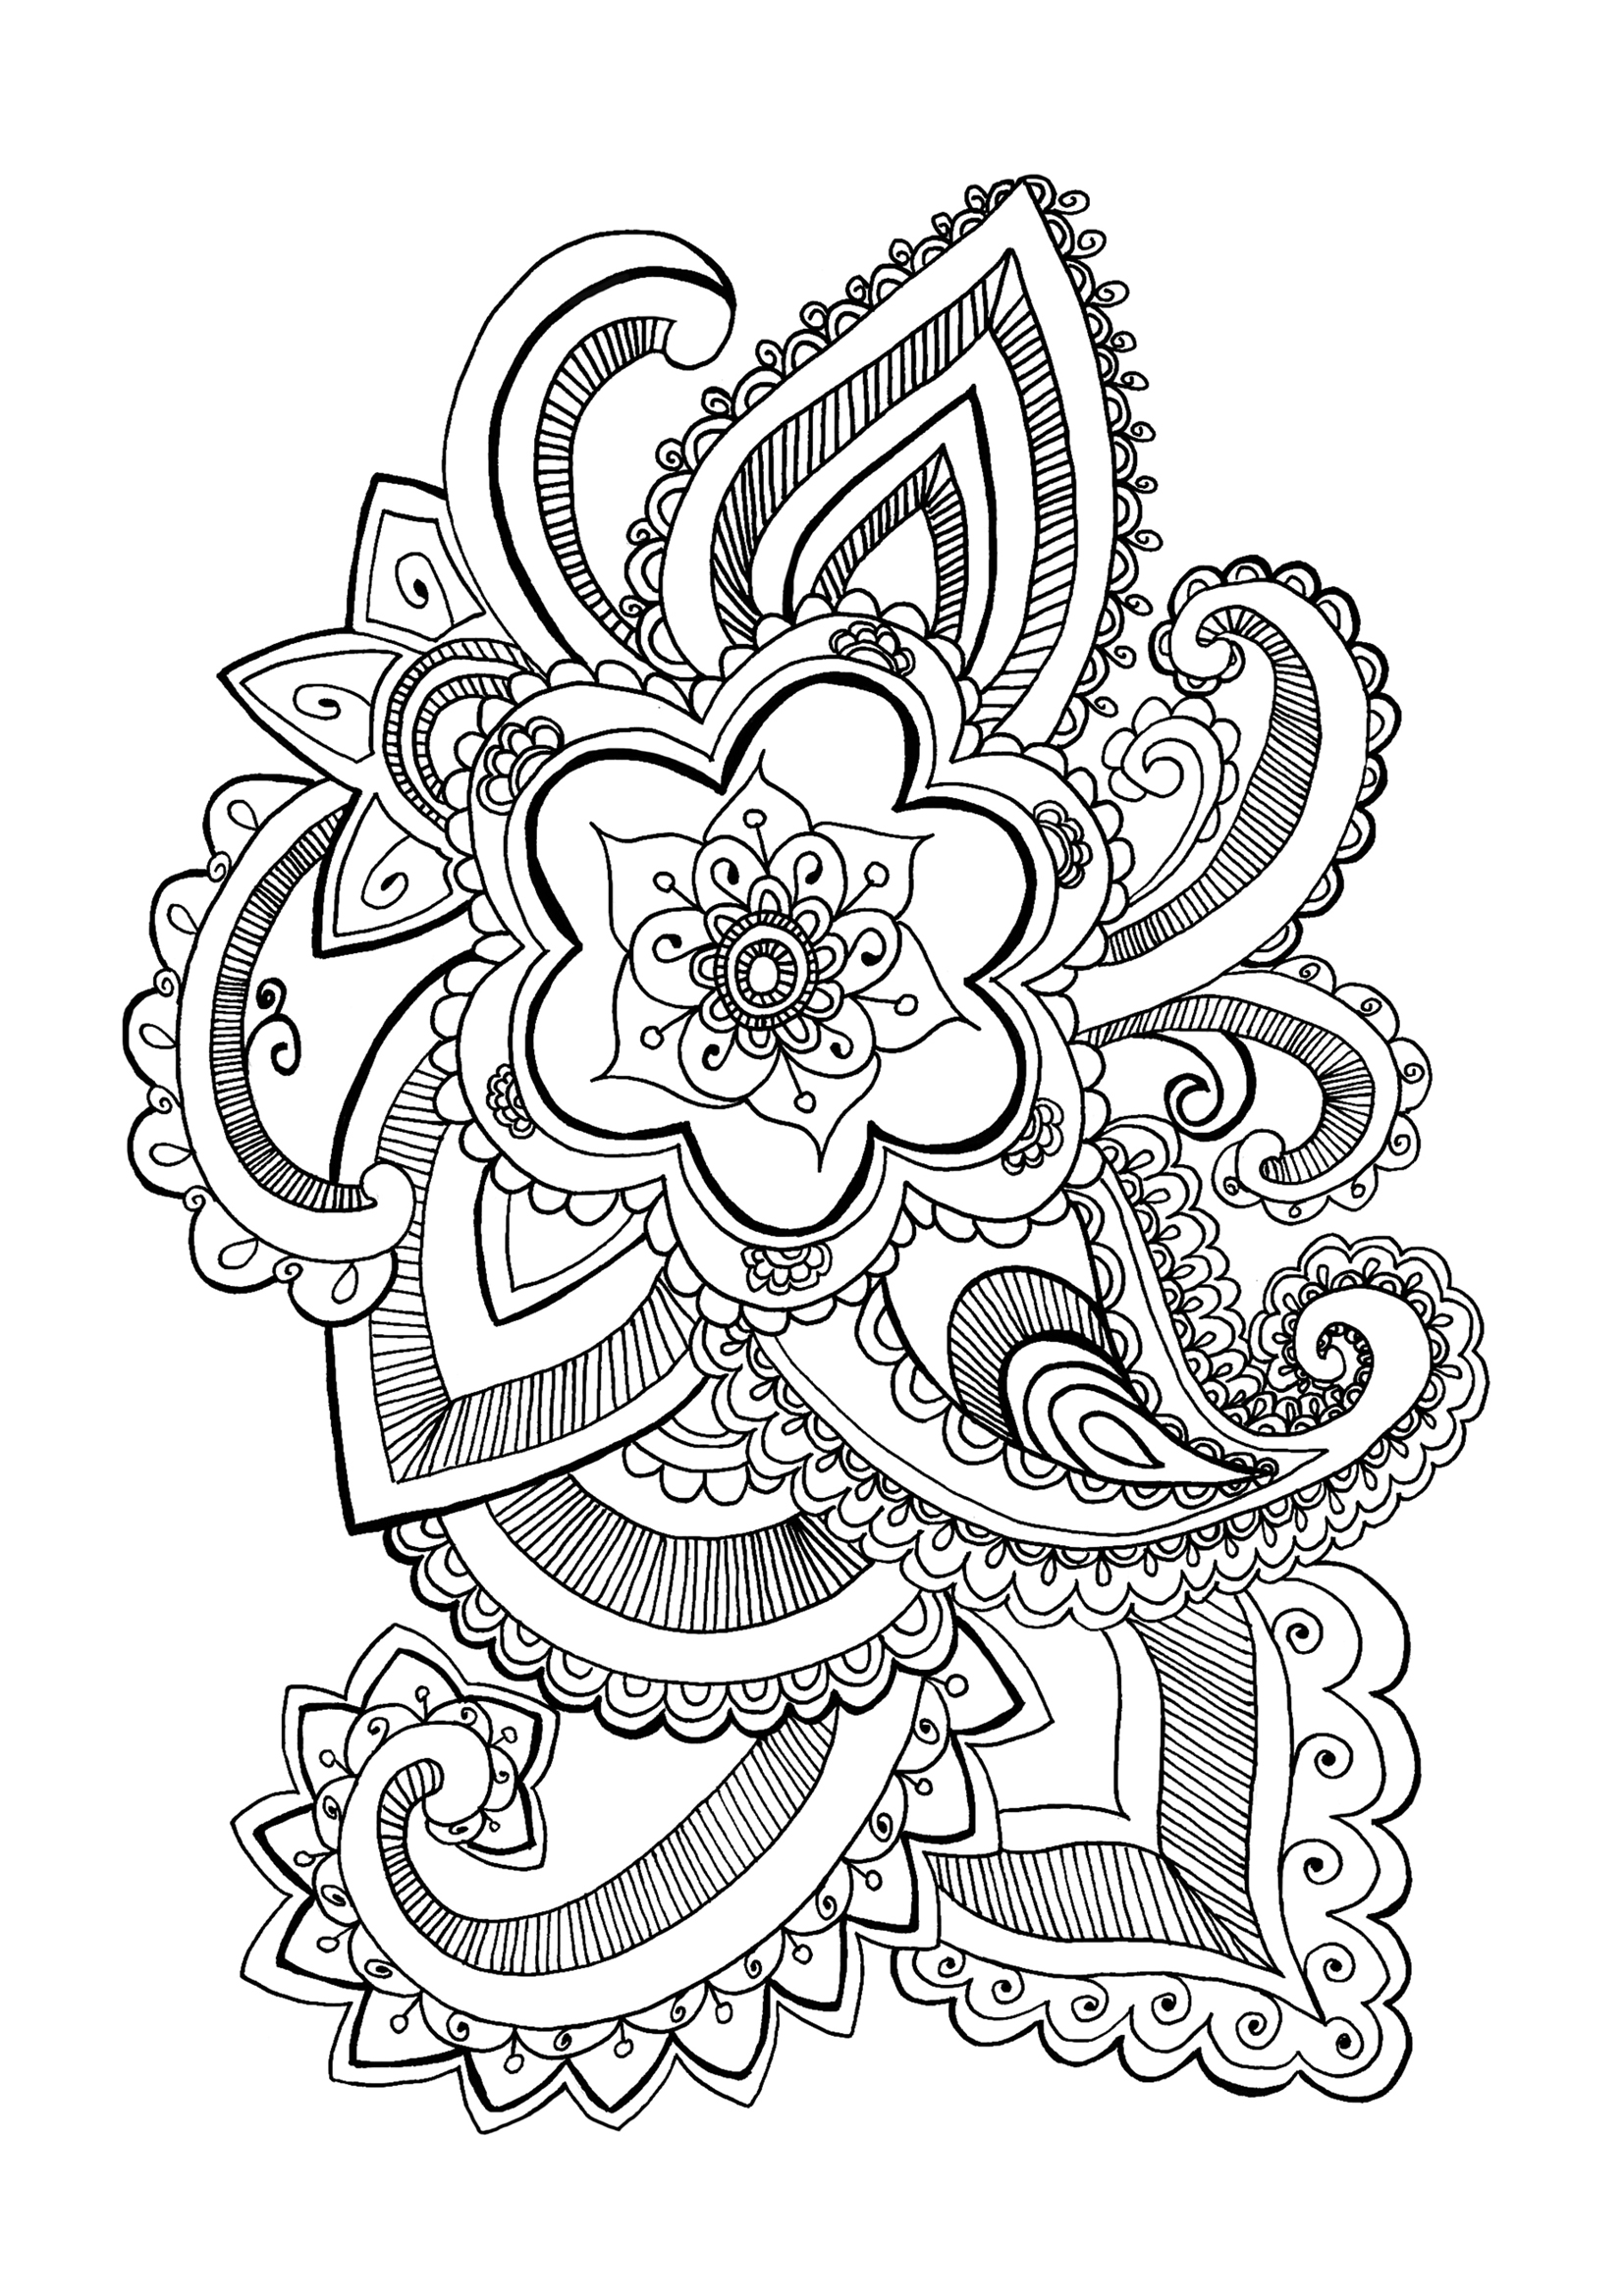 Flower celine - Flowers Adult Coloring Pages